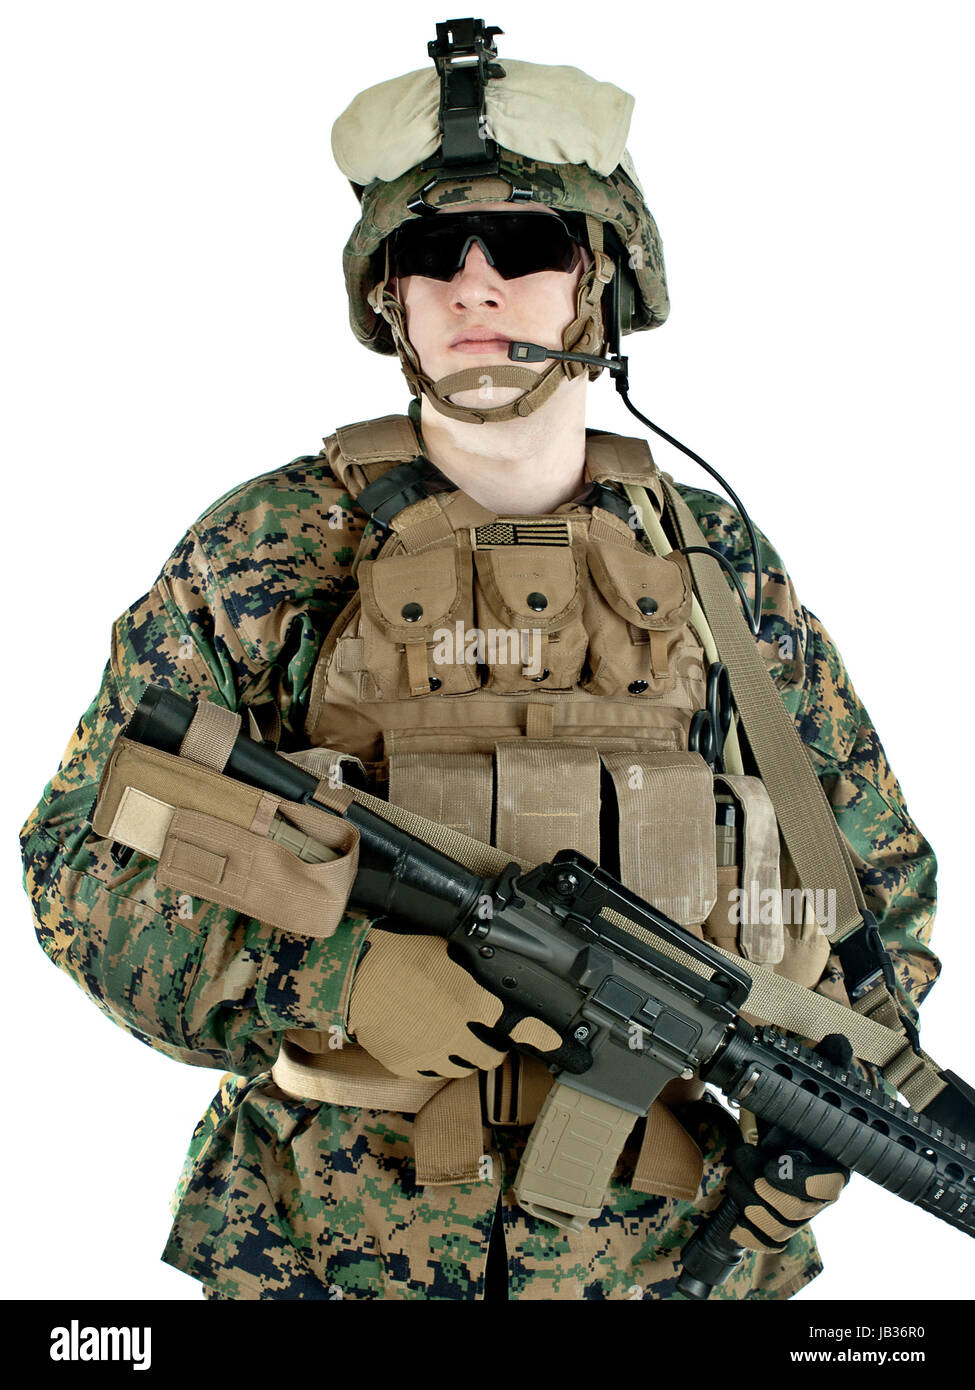 Portrait of Female United States Marine Corps Soldier in utility uniform  MARPAT pixelated camouflage with camo face paint Stock Photo - Alamy